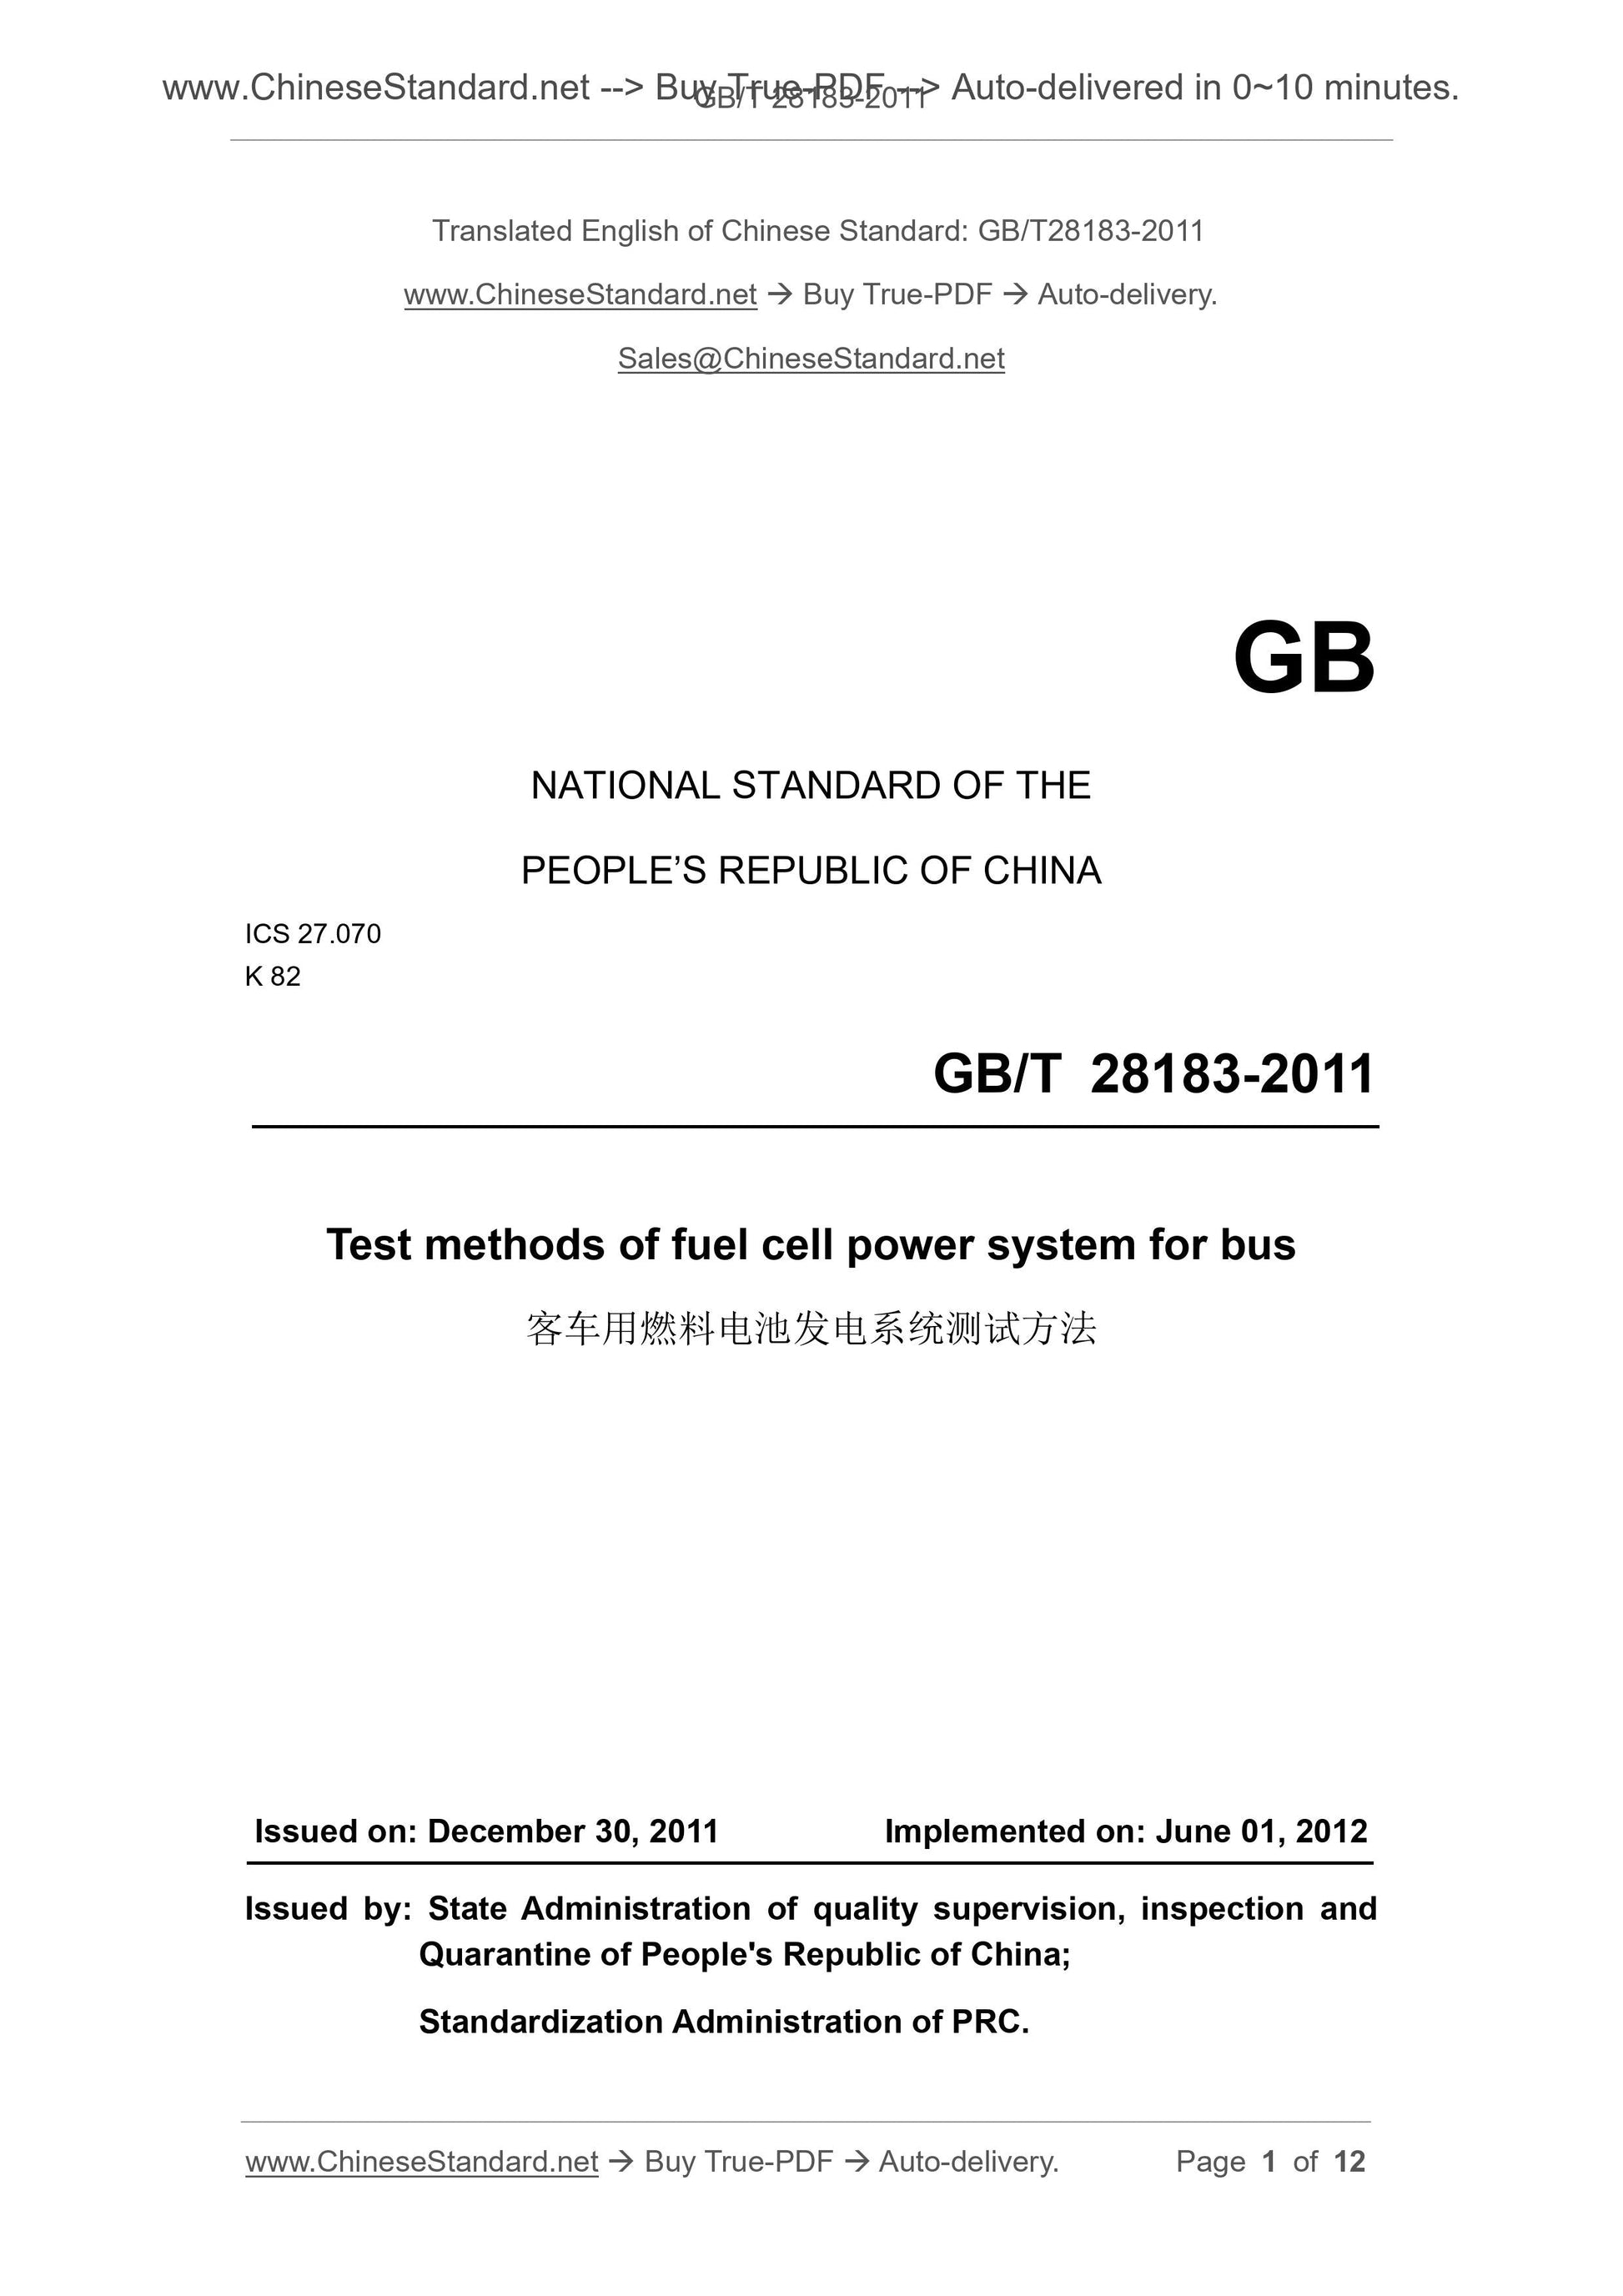 GB/T 28183-2011 Page 1